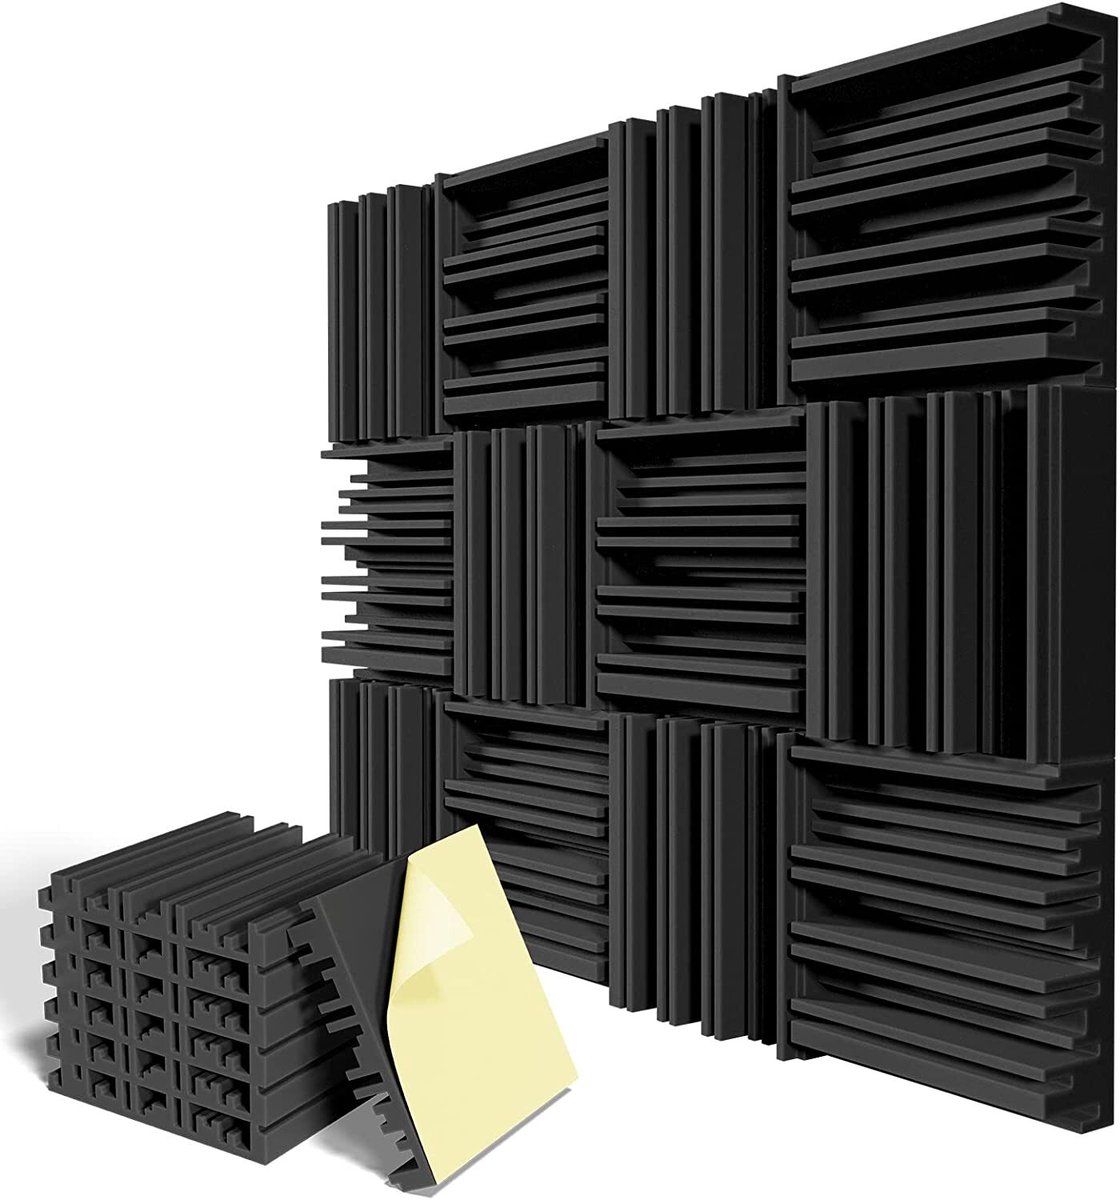 Use this acoustic soundproof panel for a better sound experience 🔊🎙️🎶

#eBay #ebayseller #ebaydeals #onlineshopping #SmallBusiness #soundproofpanels #foampanels 
#studiofoam 

ebay.com/itm/1257870033…